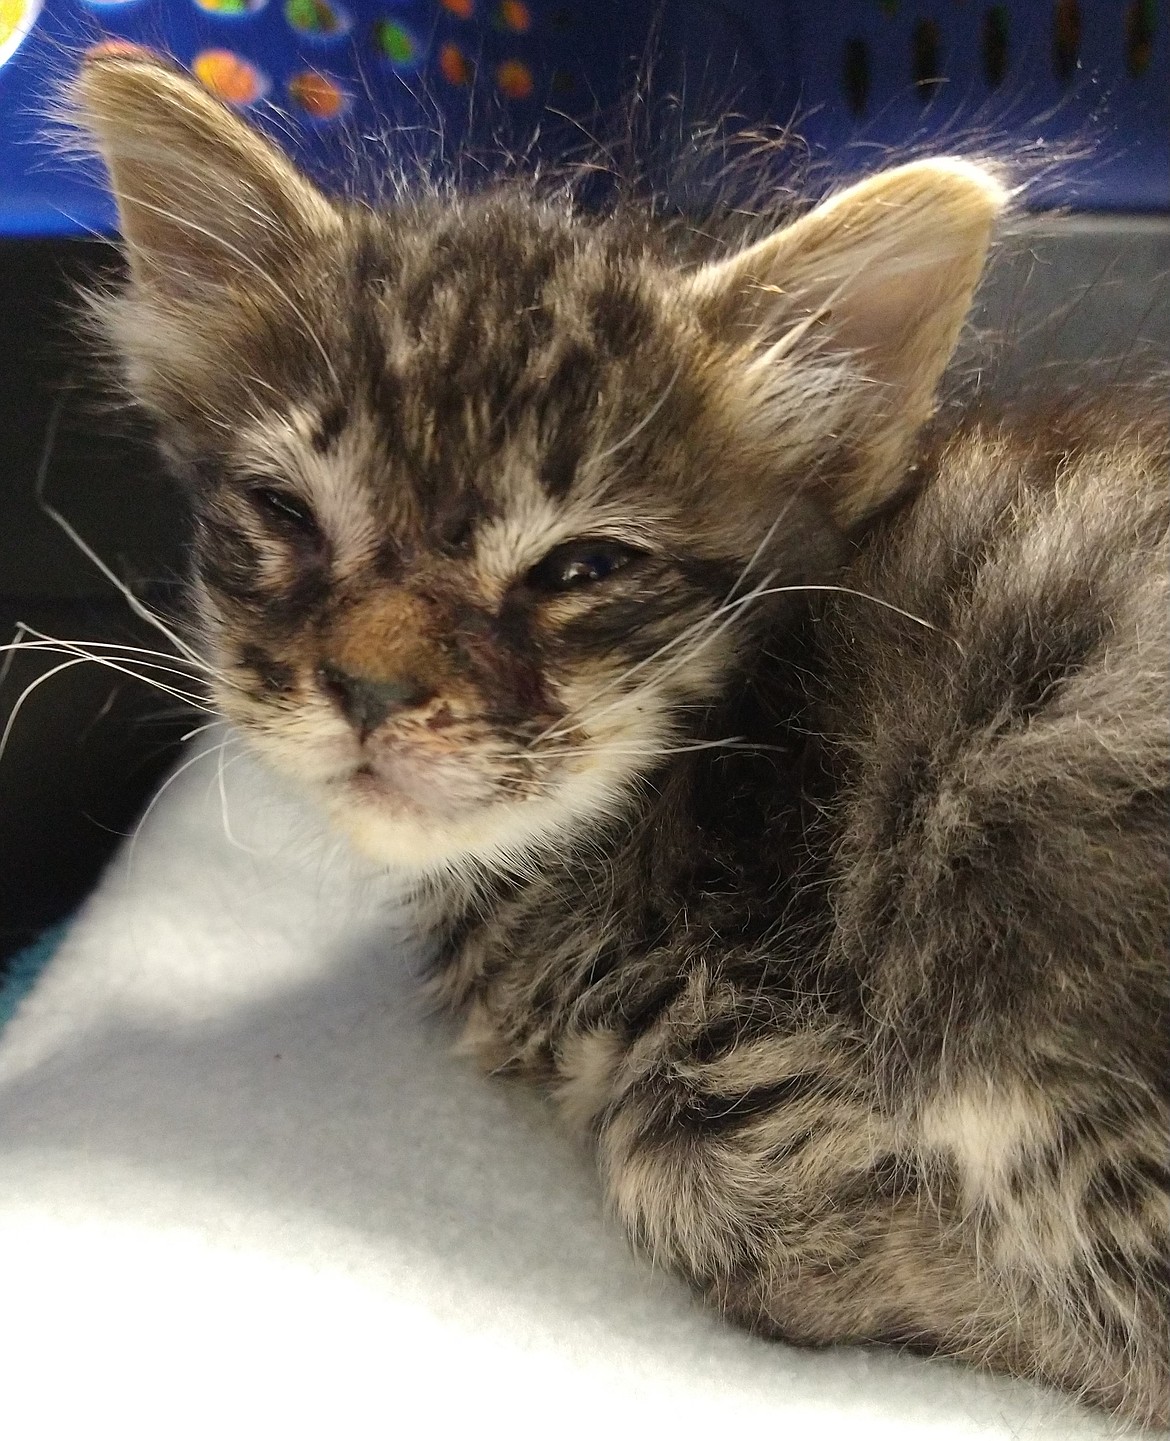 This 5-week-old male tabby kitten was brought to Companions Animal Center on Monday with infections and injuries to his face. Shelter staff say he was attacked by a small animal. He is expected to survive.